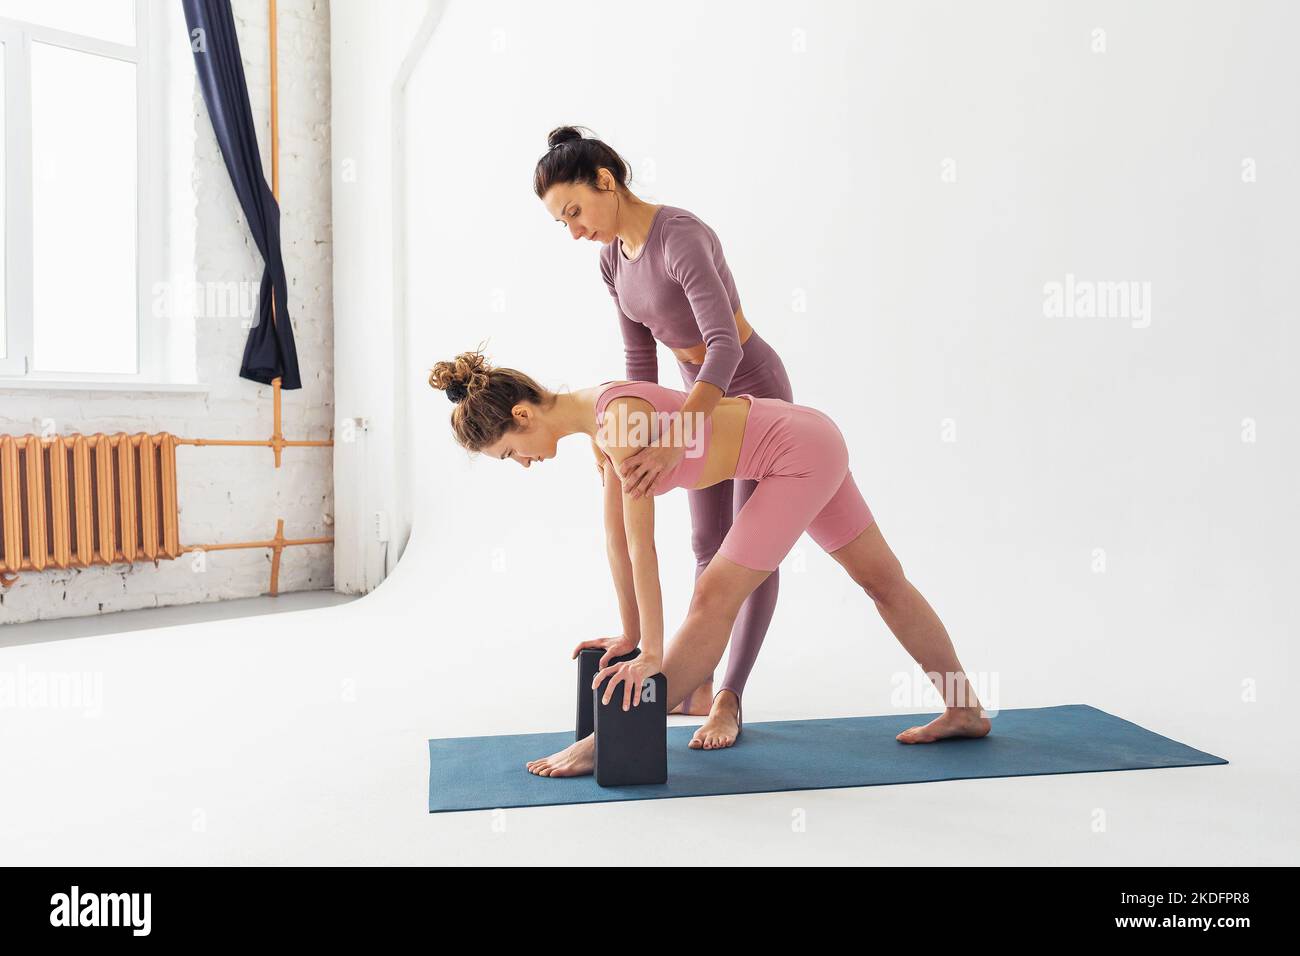 The trainer helps the student to correctly perform the variation of the parshvottanasana exercise, the deep stretching pose, they train in the studio Stock Photo